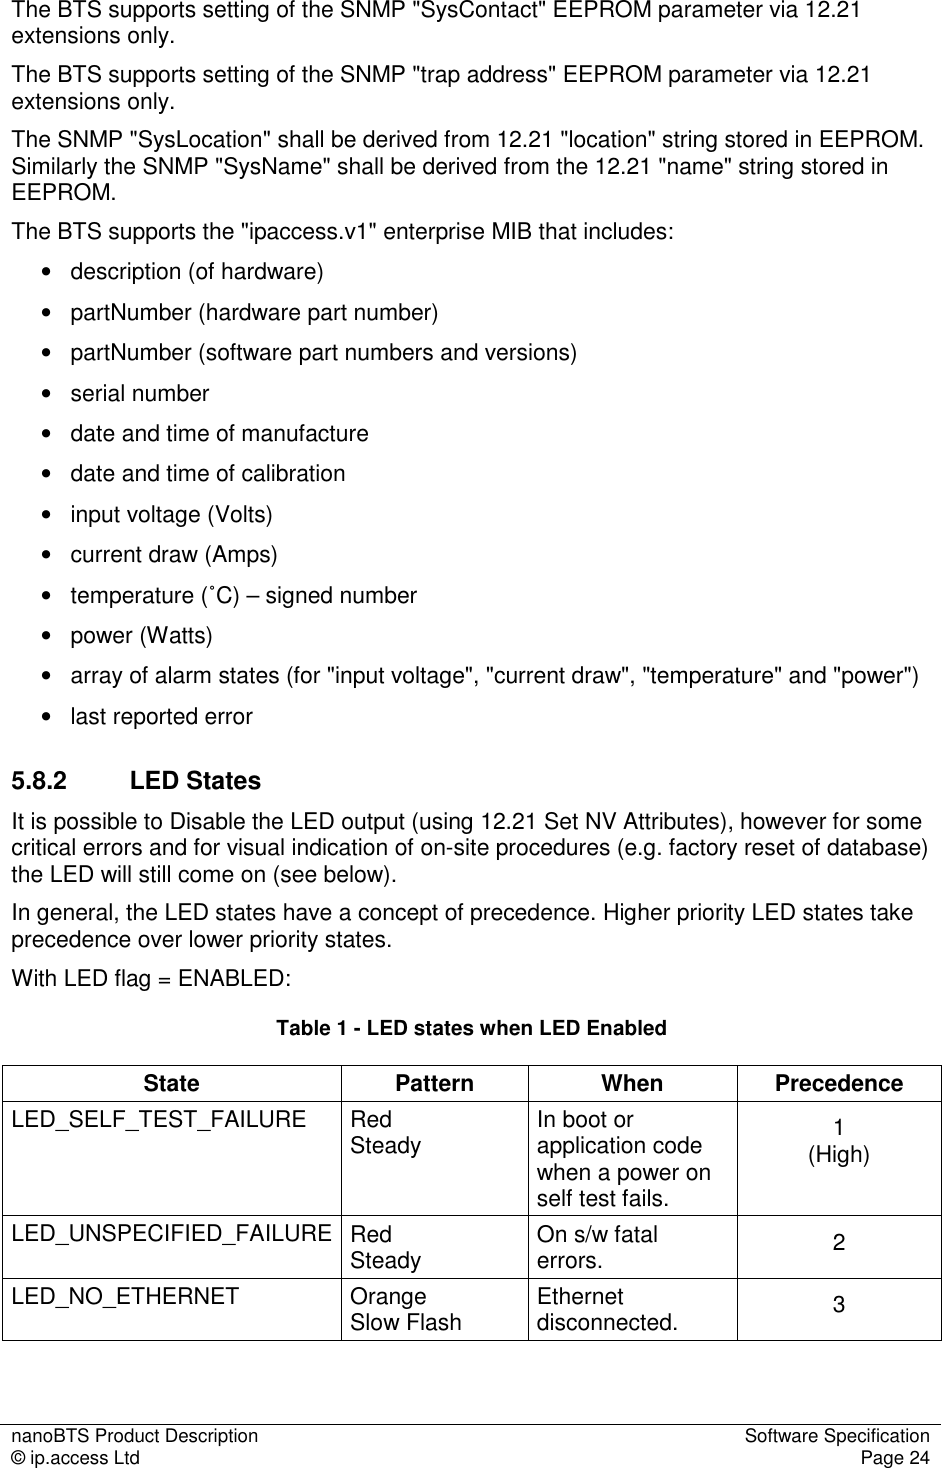 nanoBTS Product Description  Software Specification © ip.access Ltd  Page 24  The BTS supports setting of the SNMP &quot;SysContact&quot; EEPROM parameter via 12.21 extensions only. The BTS supports setting of the SNMP &quot;trap address&quot; EEPROM parameter via 12.21 extensions only. The SNMP &quot;SysLocation&quot; shall be derived from 12.21 &quot;location&quot; string stored in EEPROM. Similarly the SNMP &quot;SysName&quot; shall be derived from the 12.21 &quot;name&quot; string stored in EEPROM. The BTS supports the &quot;ipaccess.v1&quot; enterprise MIB that includes: •   description (of hardware) •   partNumber (hardware part number) •   partNumber (software part numbers and versions) •   serial number •   date and time of manufacture •   date and time of calibration •   input voltage (Volts) •   current draw (Amps) •   temperature (˚C) – signed number •   power (Watts) •   array of alarm states (for &quot;input voltage&quot;, &quot;current draw&quot;, &quot;temperature&quot; and &quot;power&quot;) •   last reported error 5.8.2  LED States It is possible to Disable the LED output (using 12.21 Set NV Attributes), however for some critical errors and for visual indication of on-site procedures (e.g. factory reset of database) the LED will still come on (see below). In general, the LED states have a concept of precedence. Higher priority LED states take precedence over lower priority states. With LED flag = ENABLED: Table 1 - LED states when LED Enabled State  Pattern  When  Precedence LED_SELF_TEST_FAILURE  Red Steady  In boot or application code when a power on self test fails. 1 (High) LED_UNSPECIFIED_FAILURE Red Steady  On s/w fatal errors.  2 LED_NO_ETHERNET  Orange Slow Flash  Ethernet disconnected.  3 